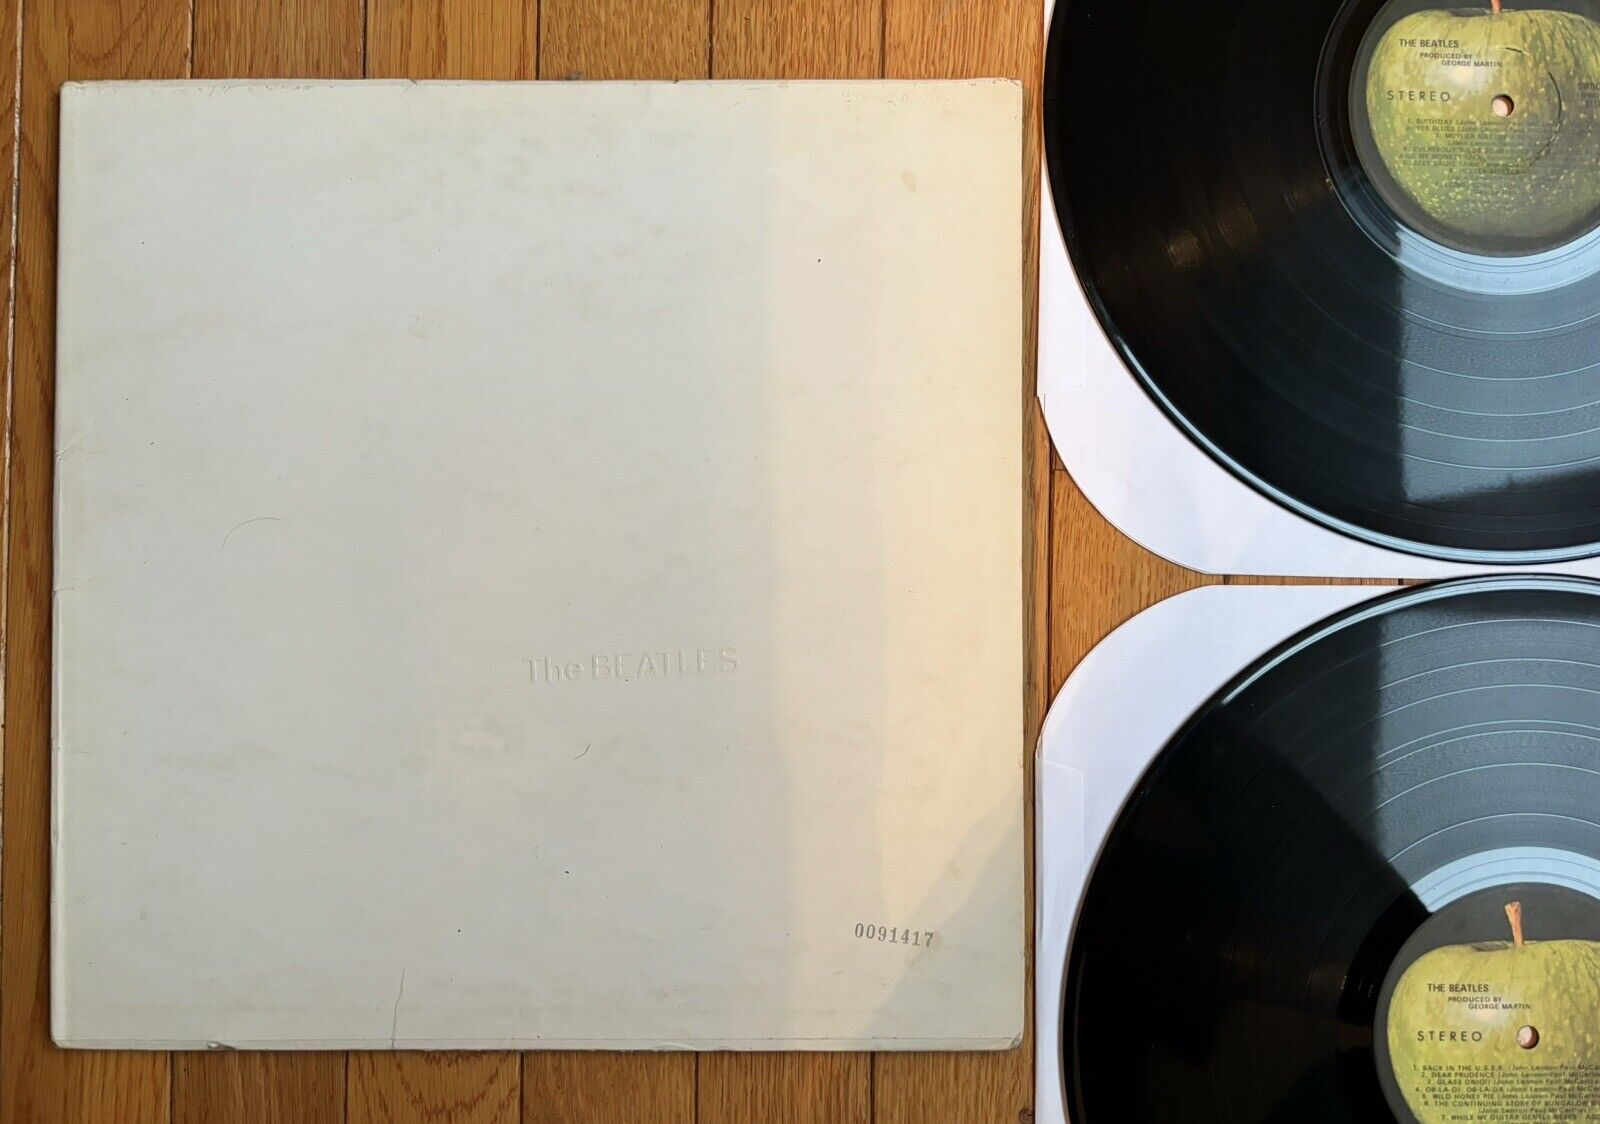 THE BEATLES - WHITE ALBUM - 0091417  VERY LOW NUMBER 1968 SWB-101